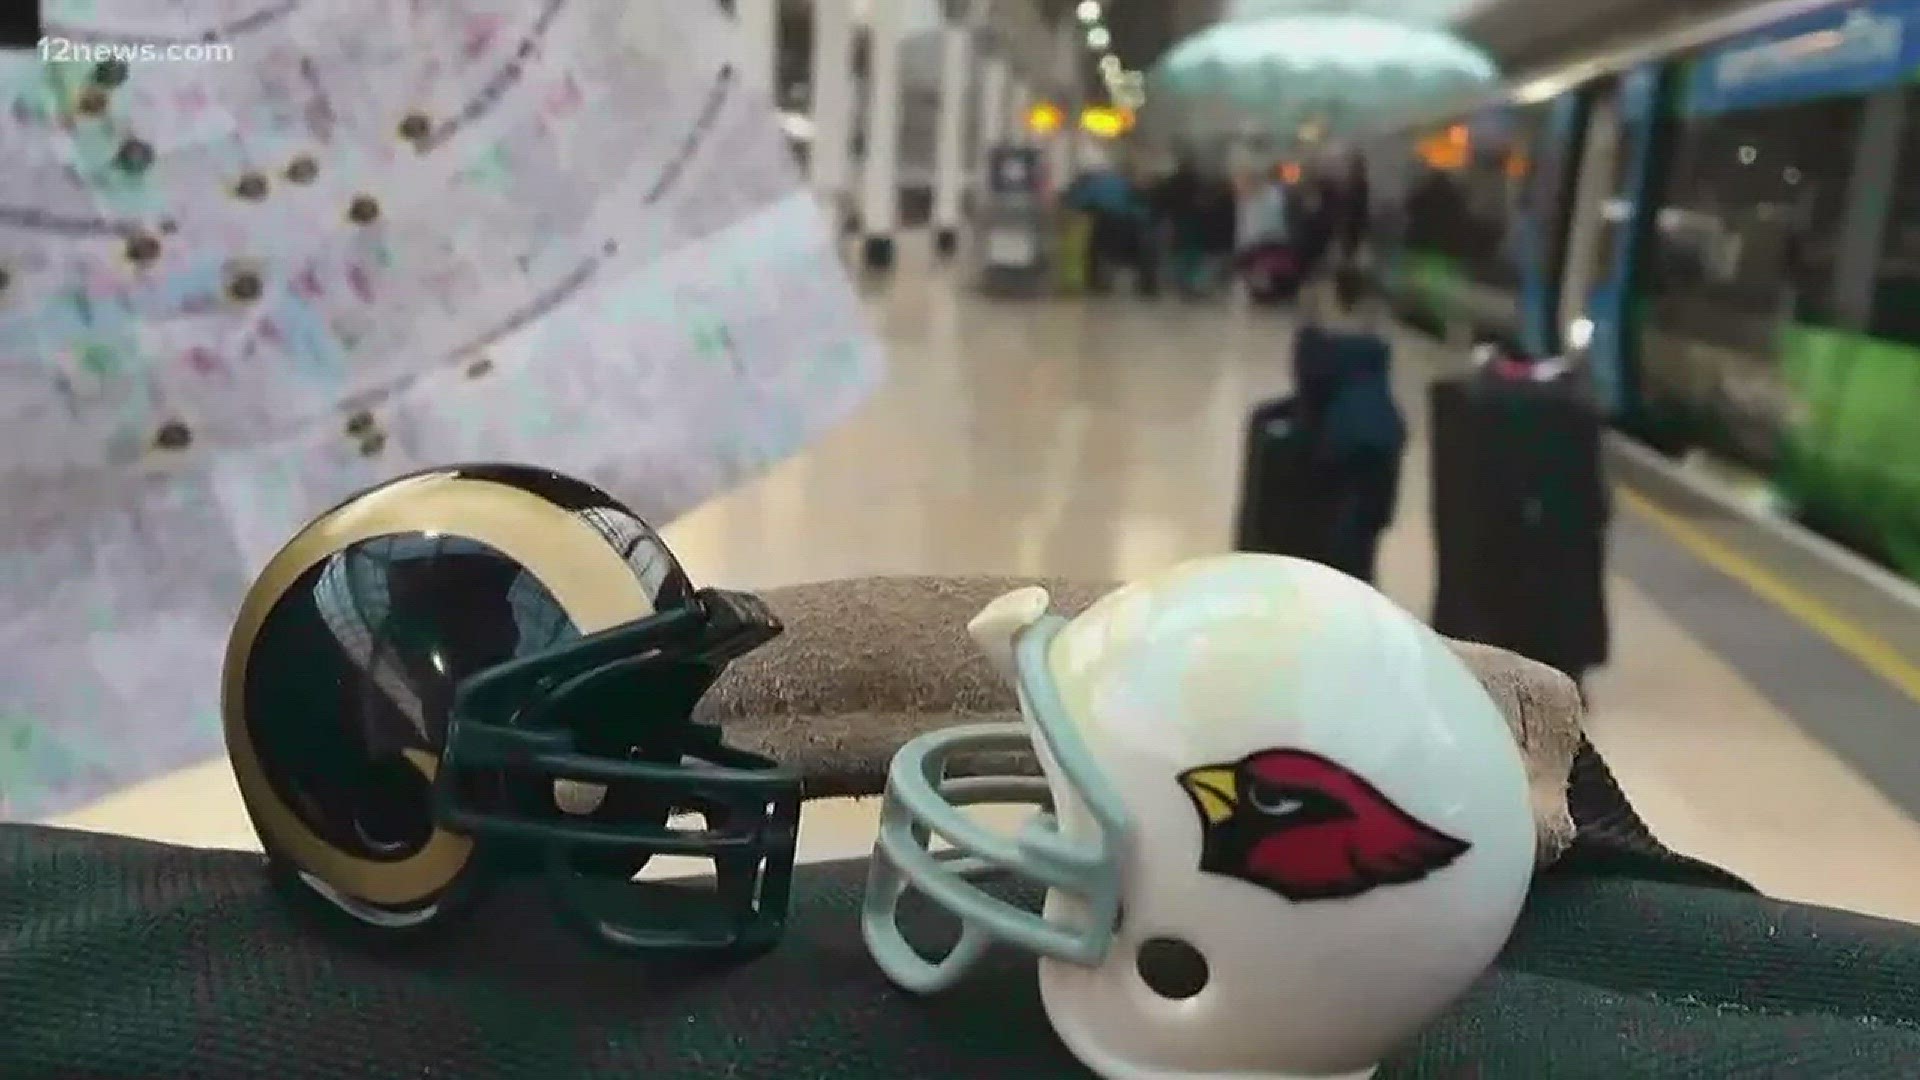 The Arizona Cardinals have landed across the pond and are already gearing up to take on the Rams.